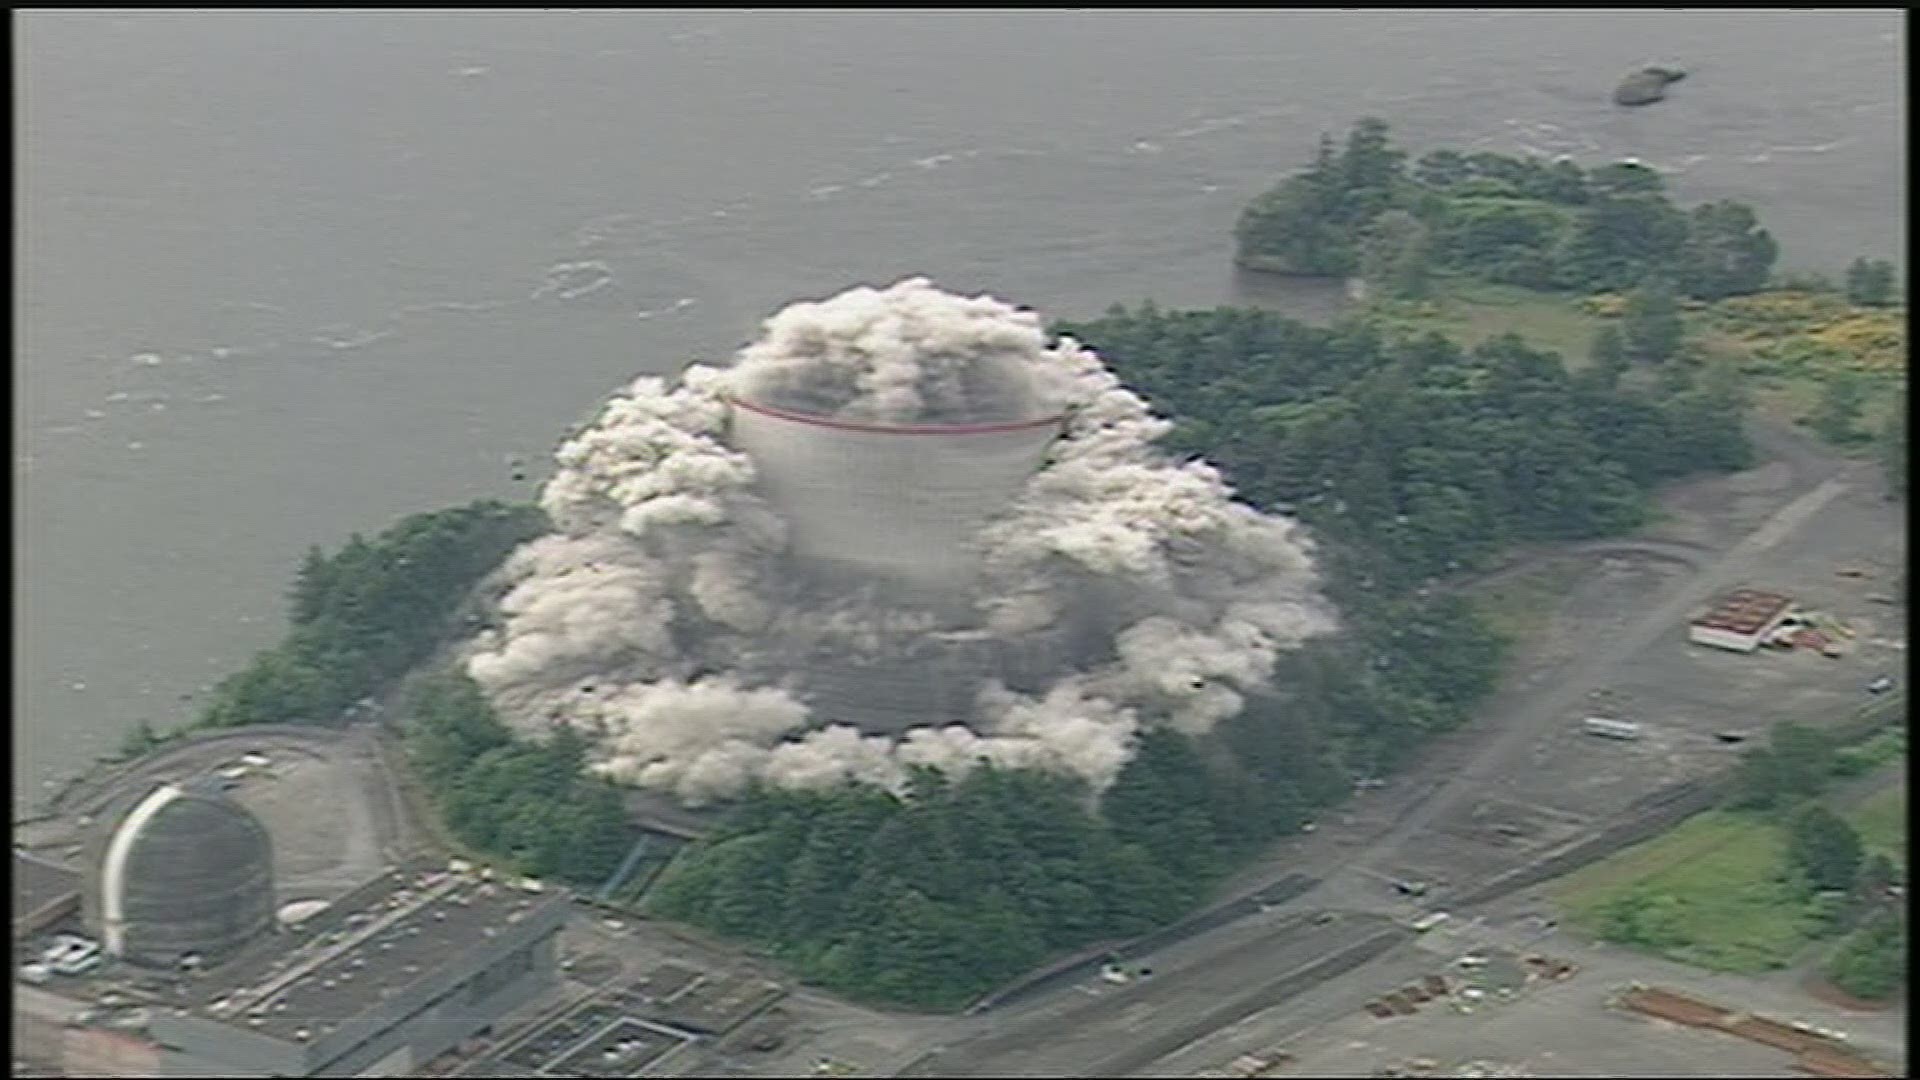 KGW video from the 2006 Trojan nuclear power plant implosion in Rainier, Oregon